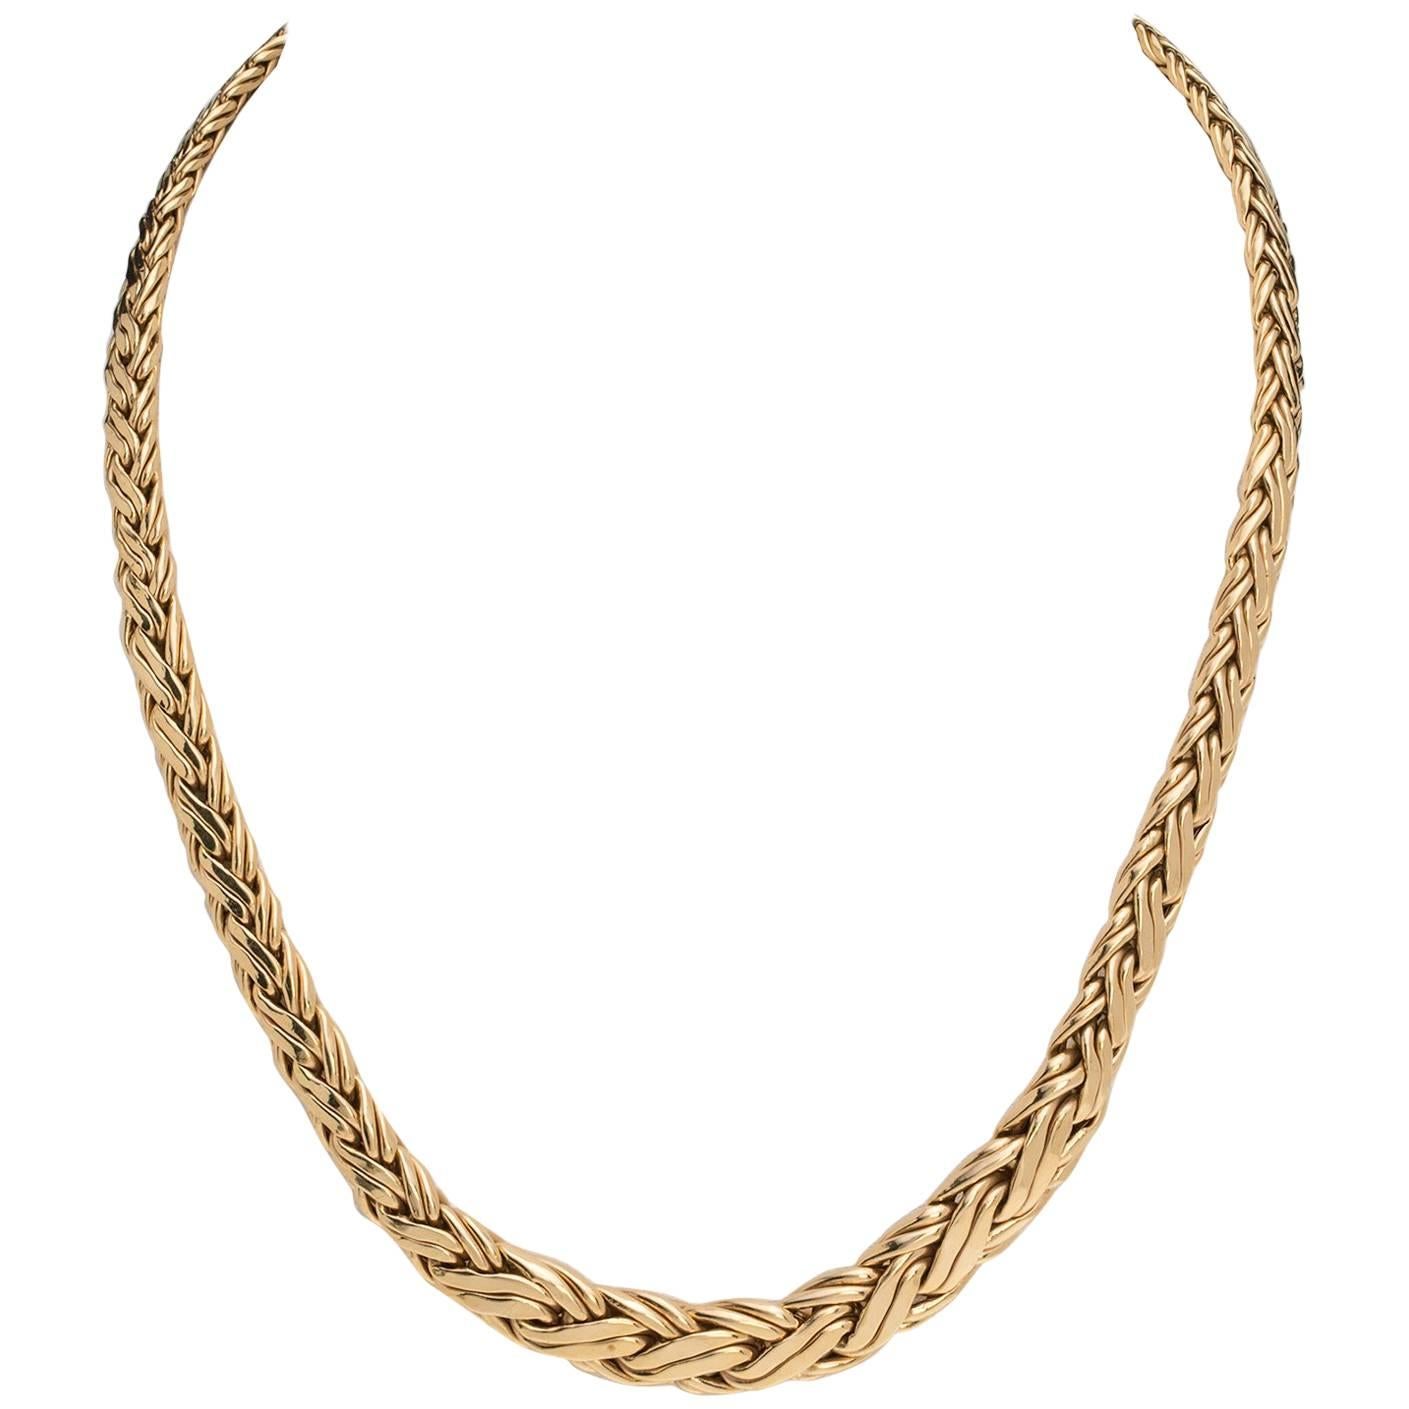 Tiffany & Co. Woven Gold Necklace